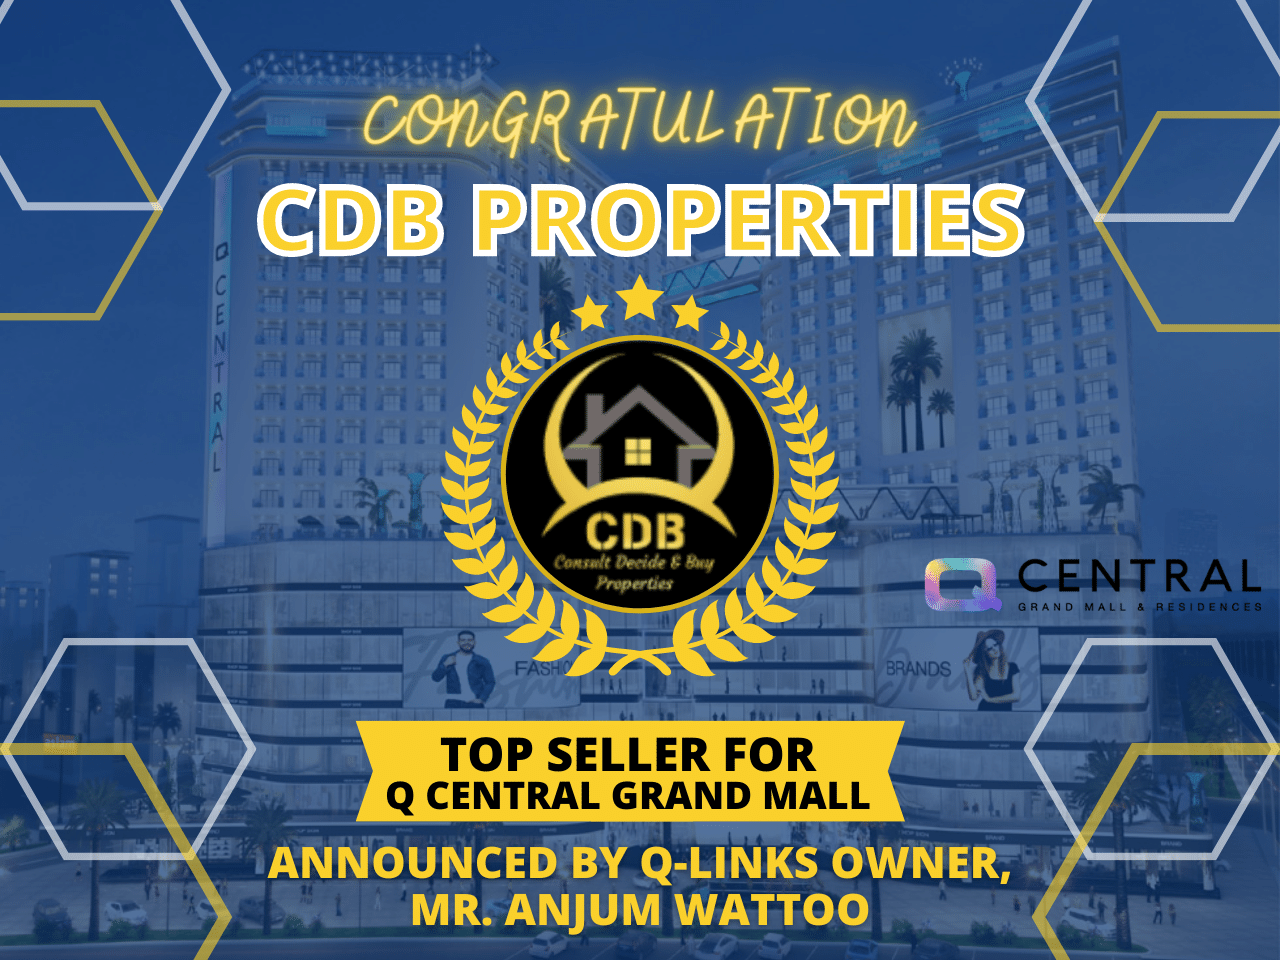 Q-Links Owner Named CDB Properties As Top Seller For Q Central Grand Mall